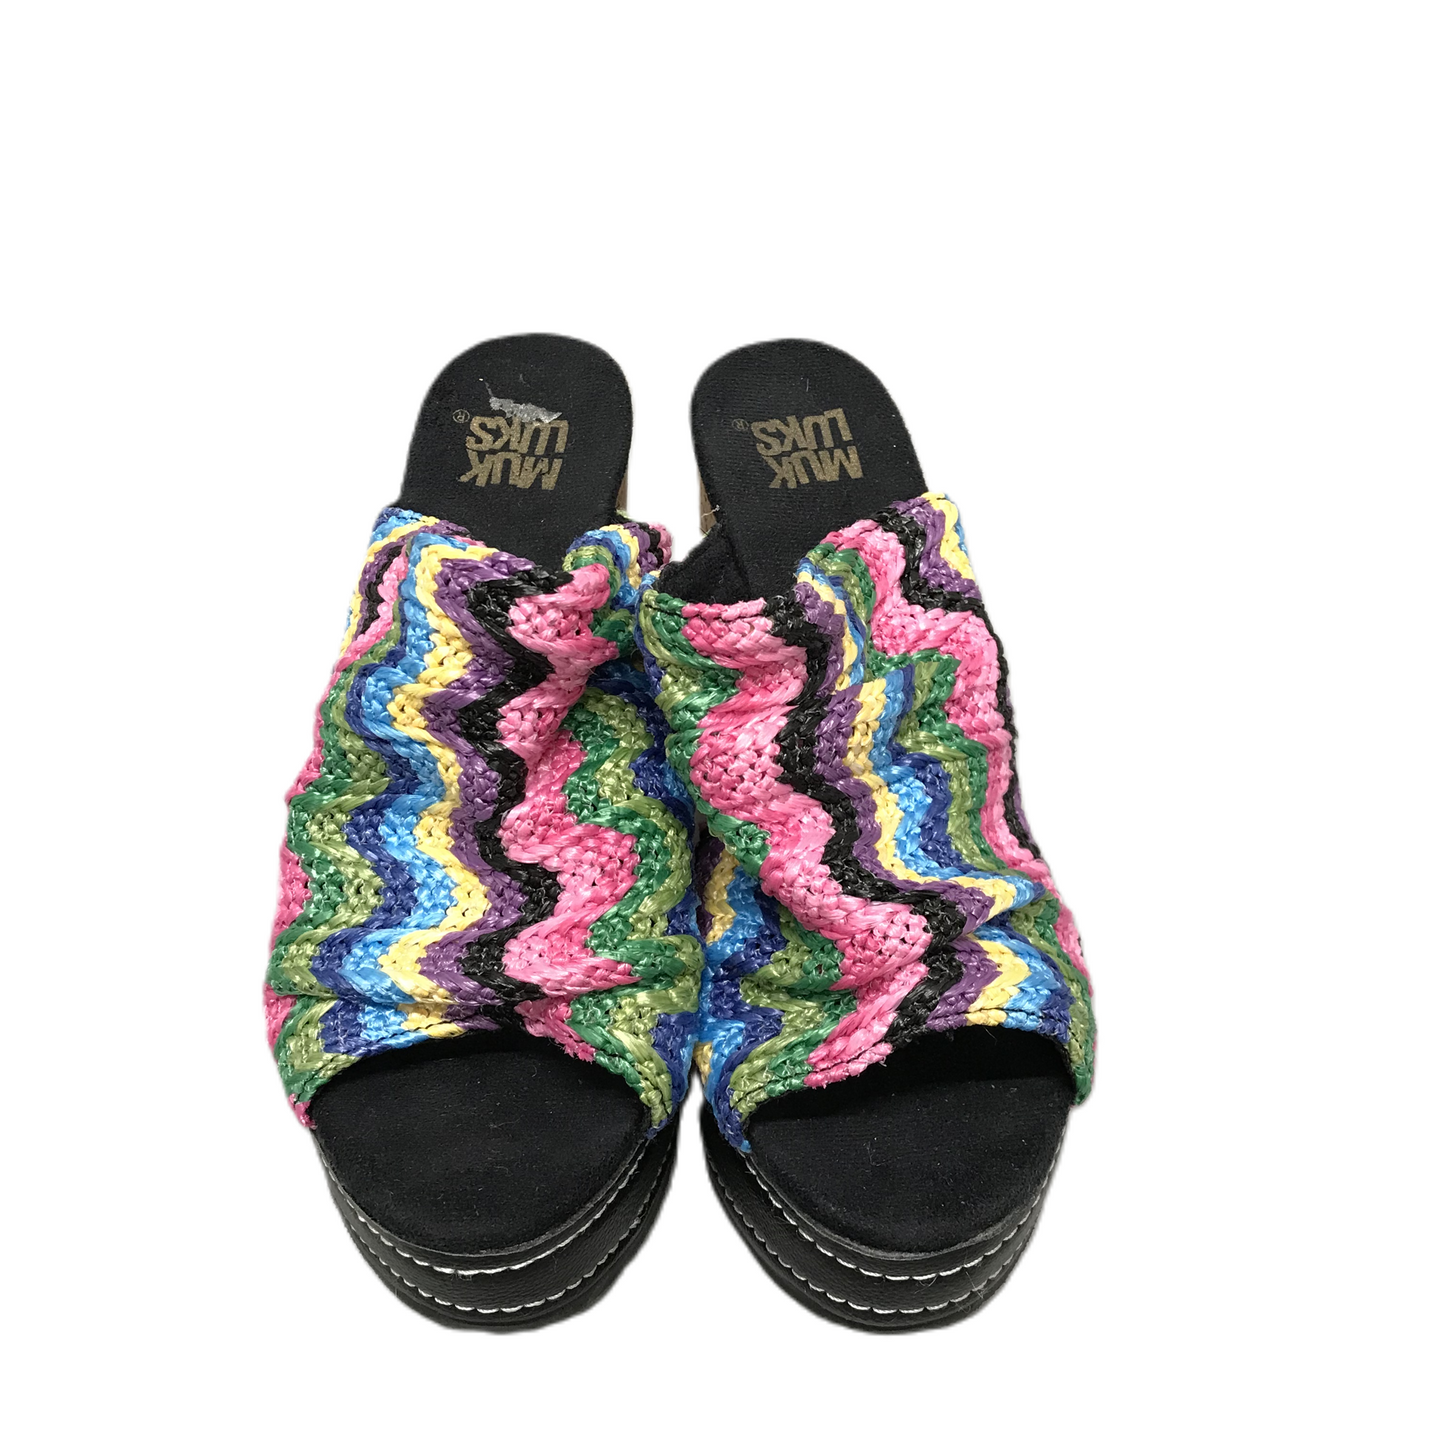 Multi-colored Sandals Heels Wedge By Muk Luks, Size: 8